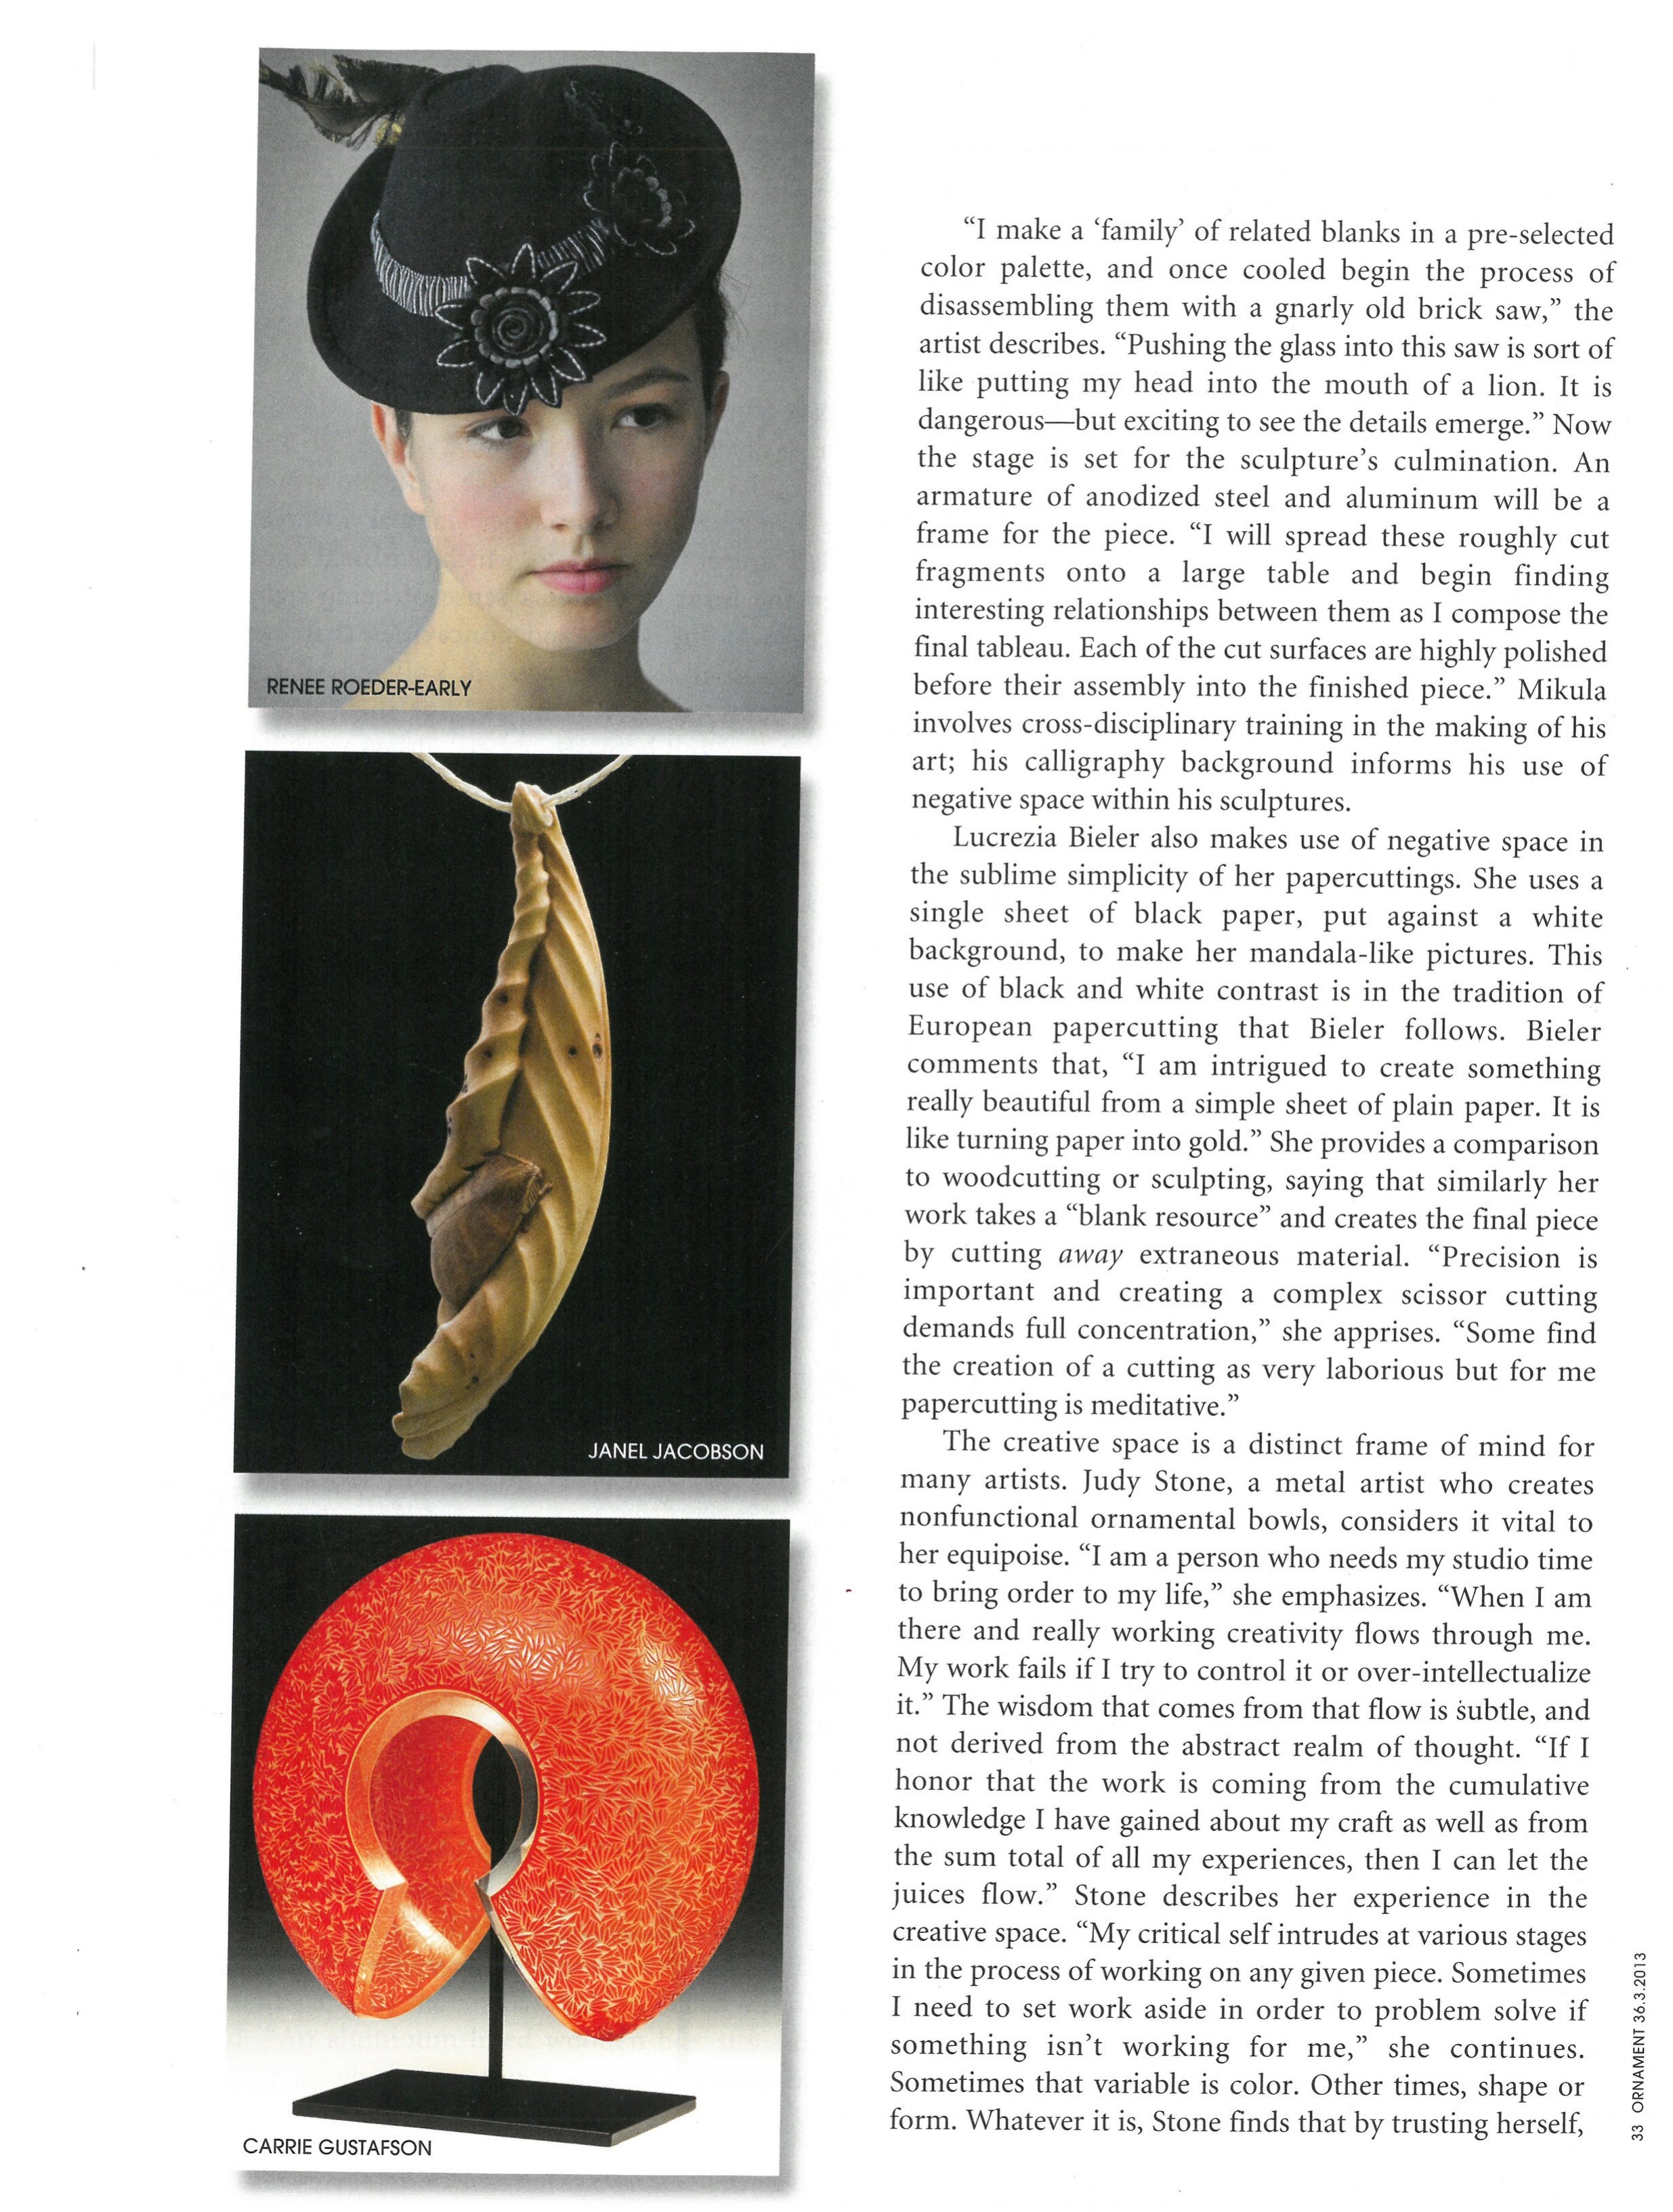 Ornament Magazine article featuring hand-blown glass by Carrie Gustafson